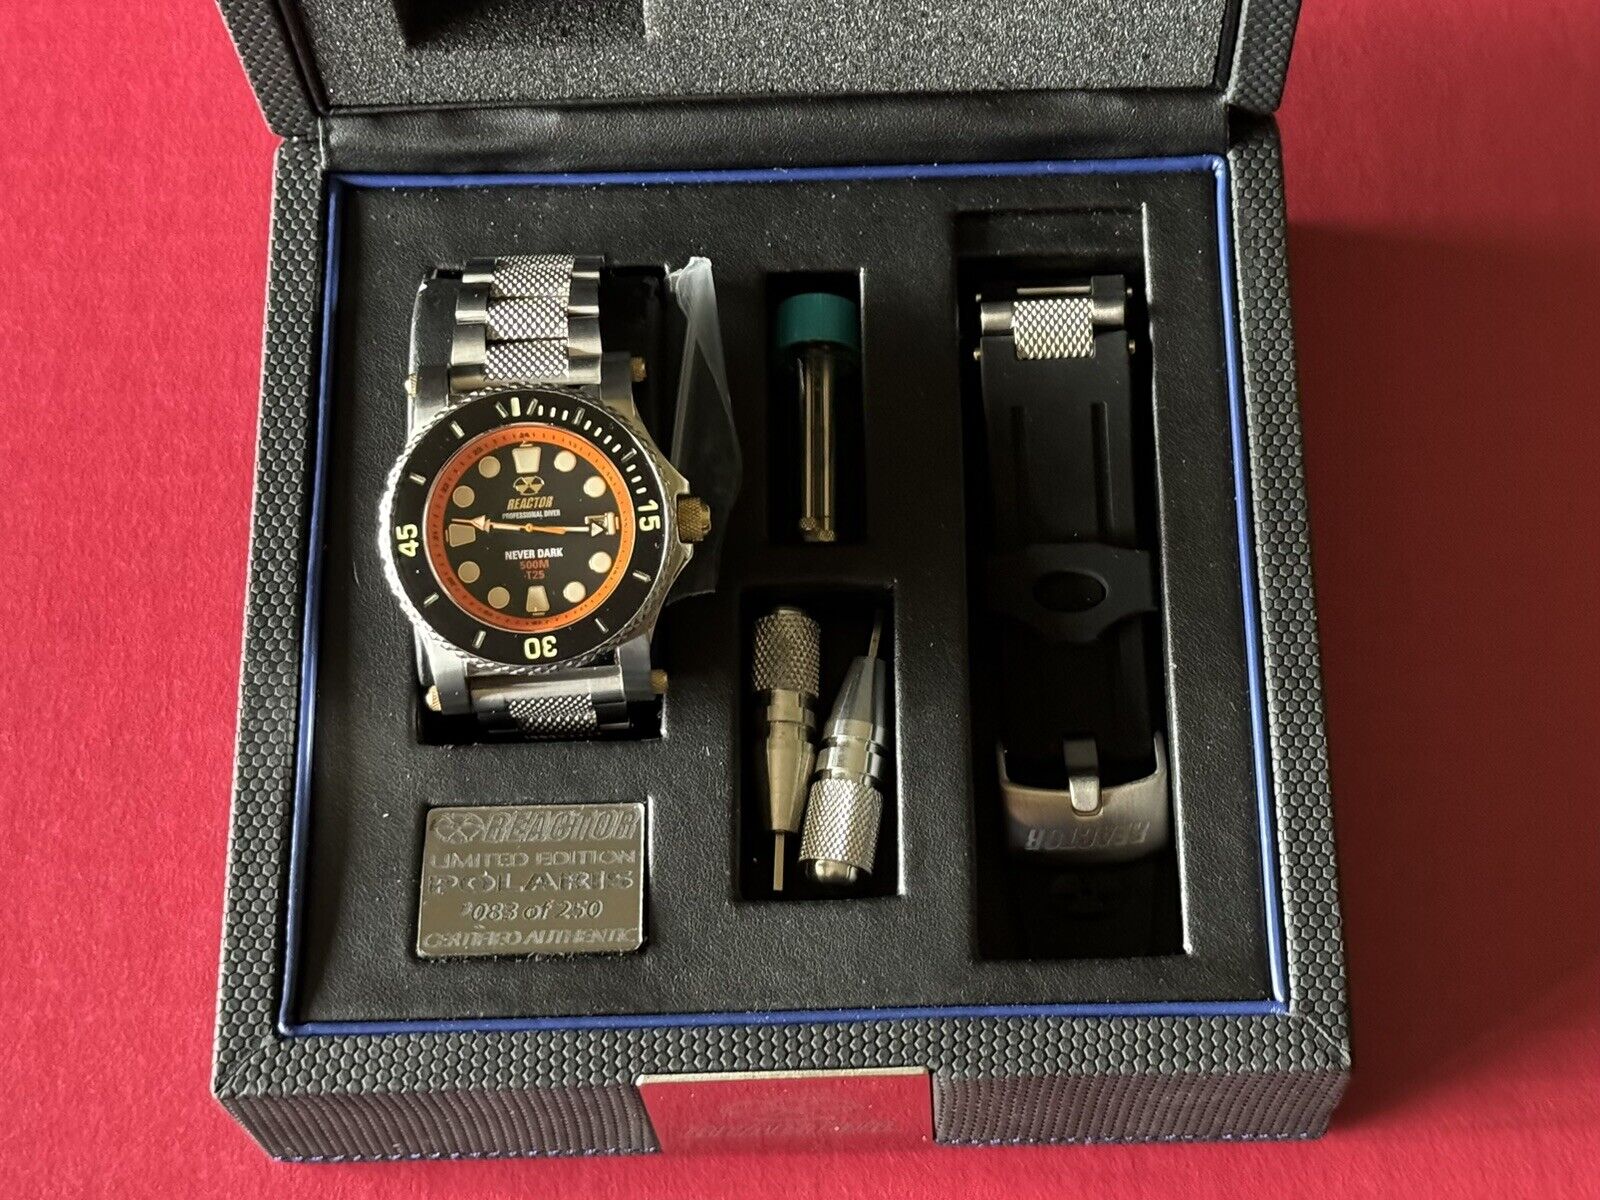 Reactor Watch Limited Edition Polaris #83 of 250 Never Worn.. Never Dark Dial